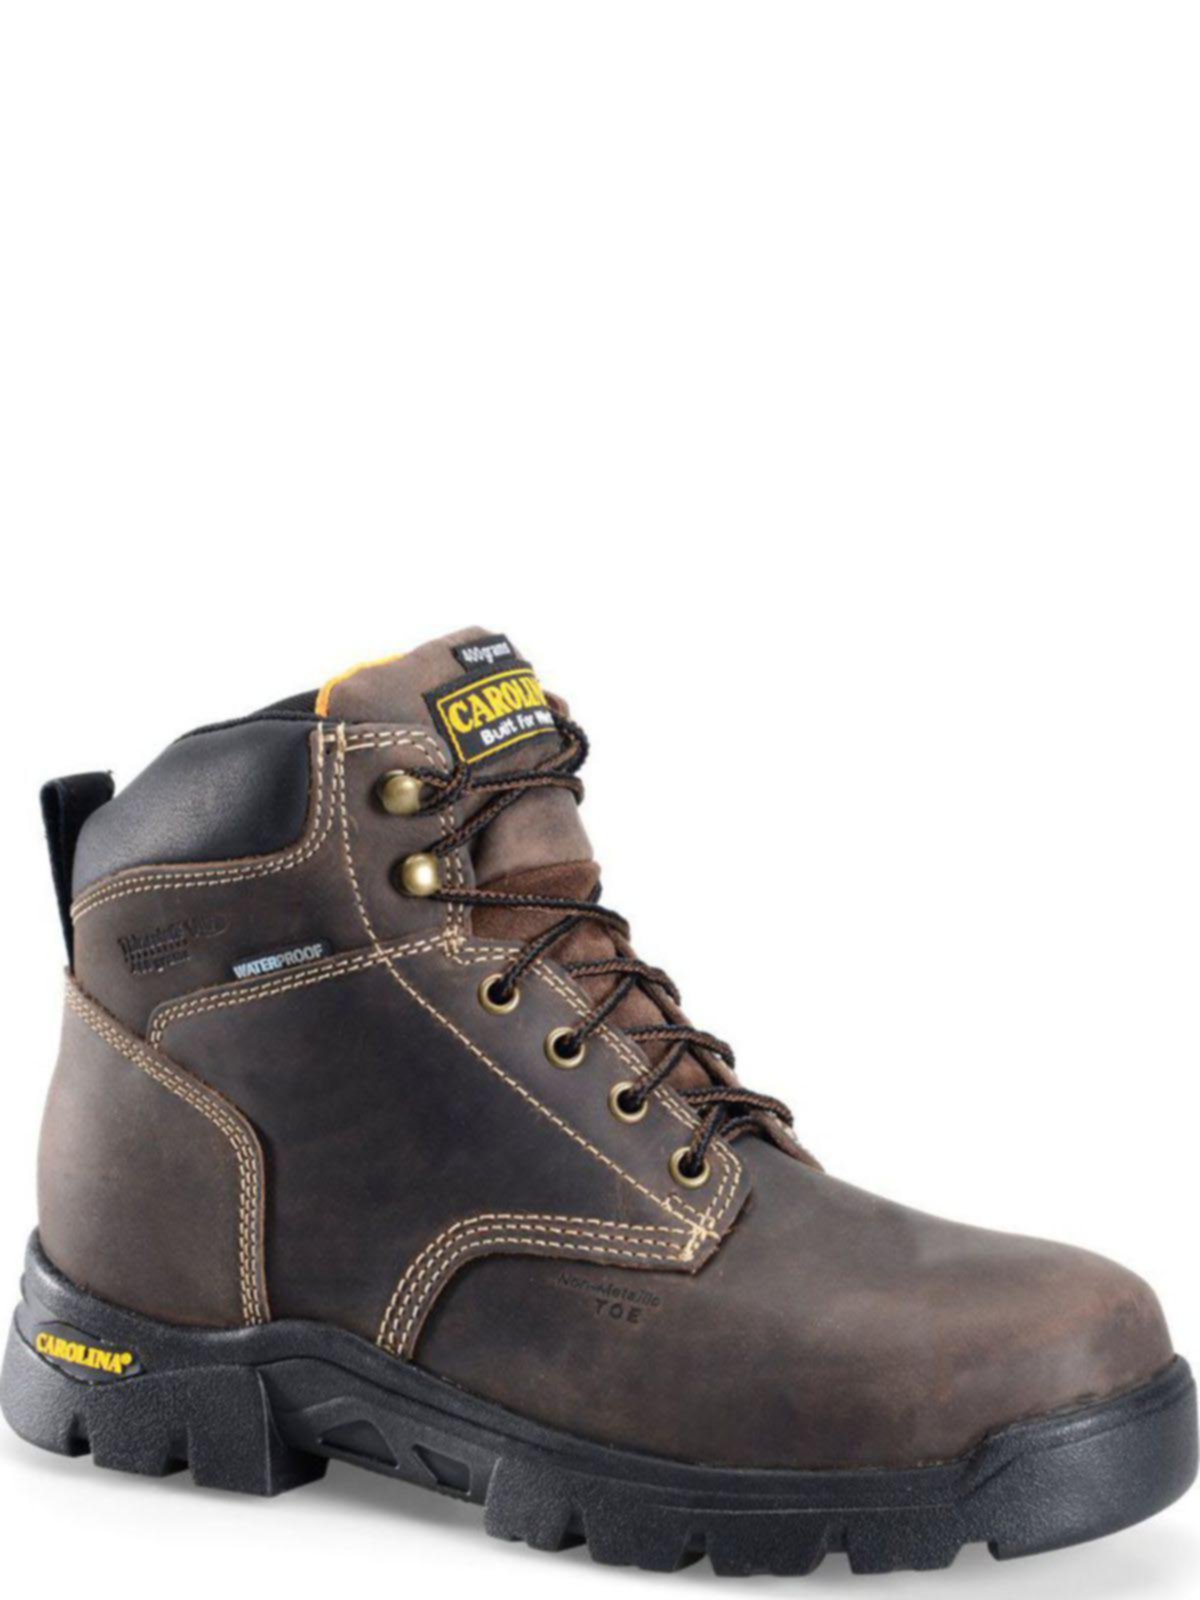 Details about   Carolina Men's Composite Toe Waterproof Safety Work Boot CA3535 